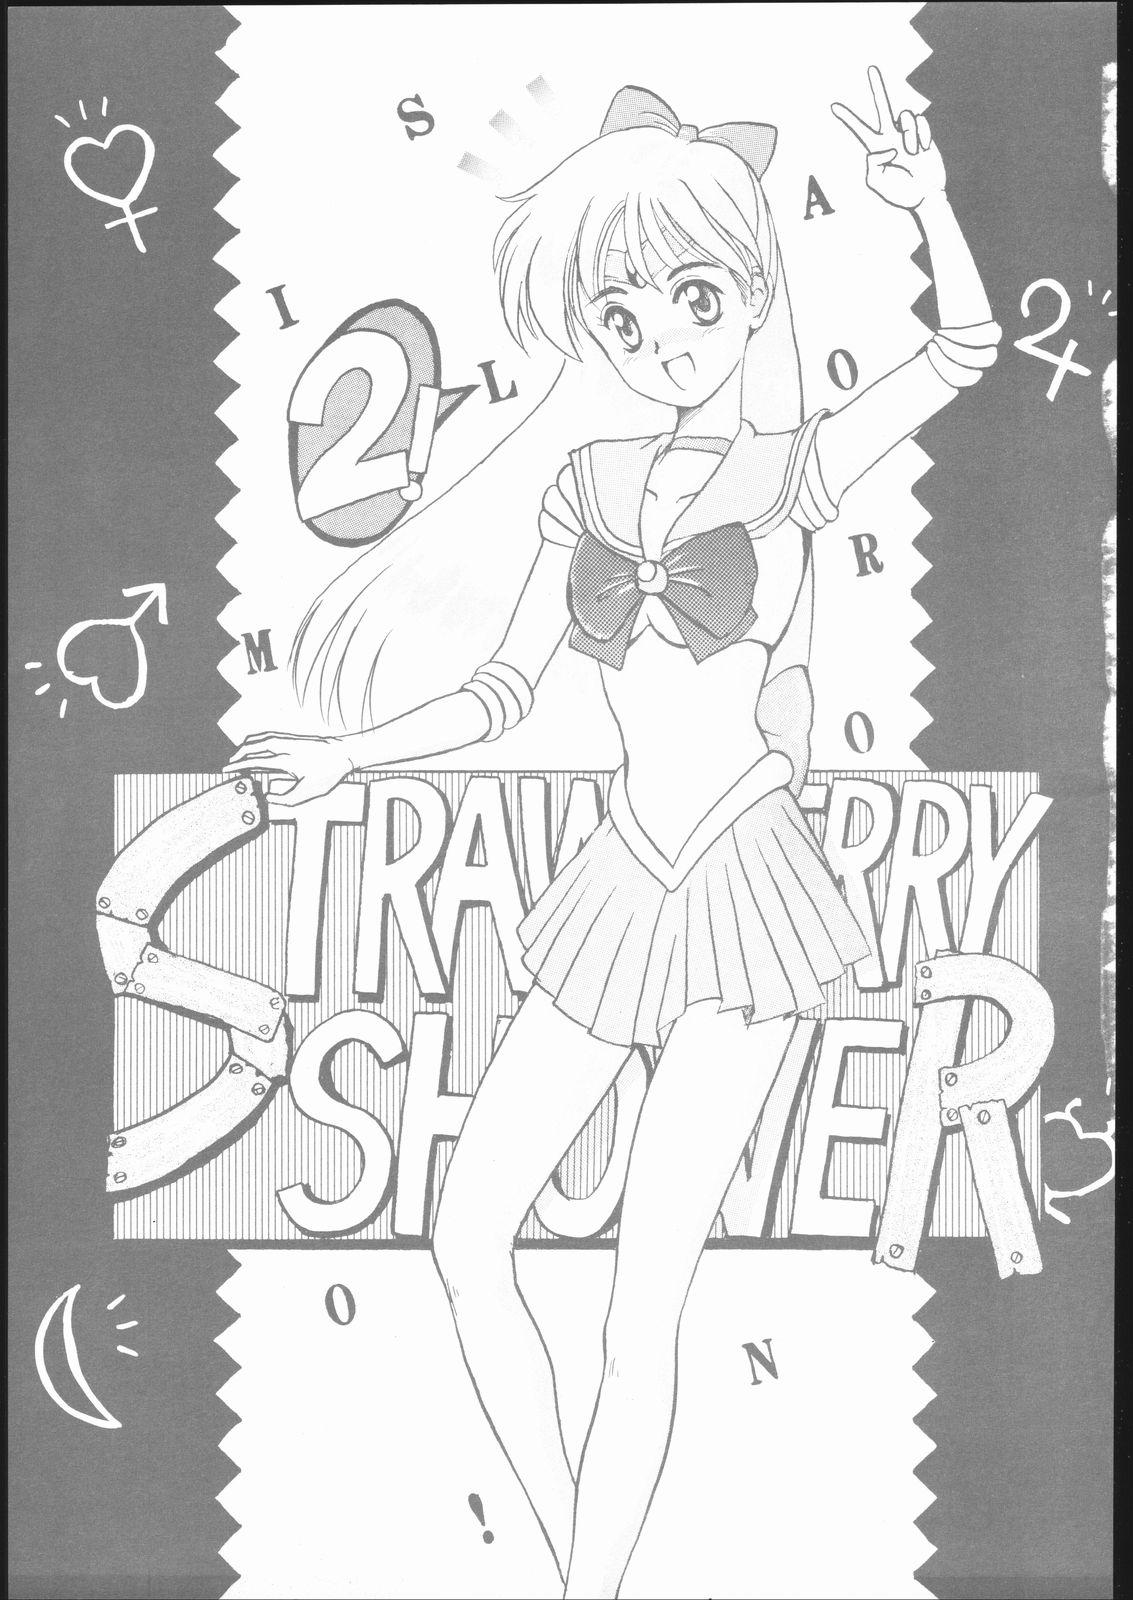 Delicia Strawberry Shower 2 - Sailor moon World heroes Russia - Page 2